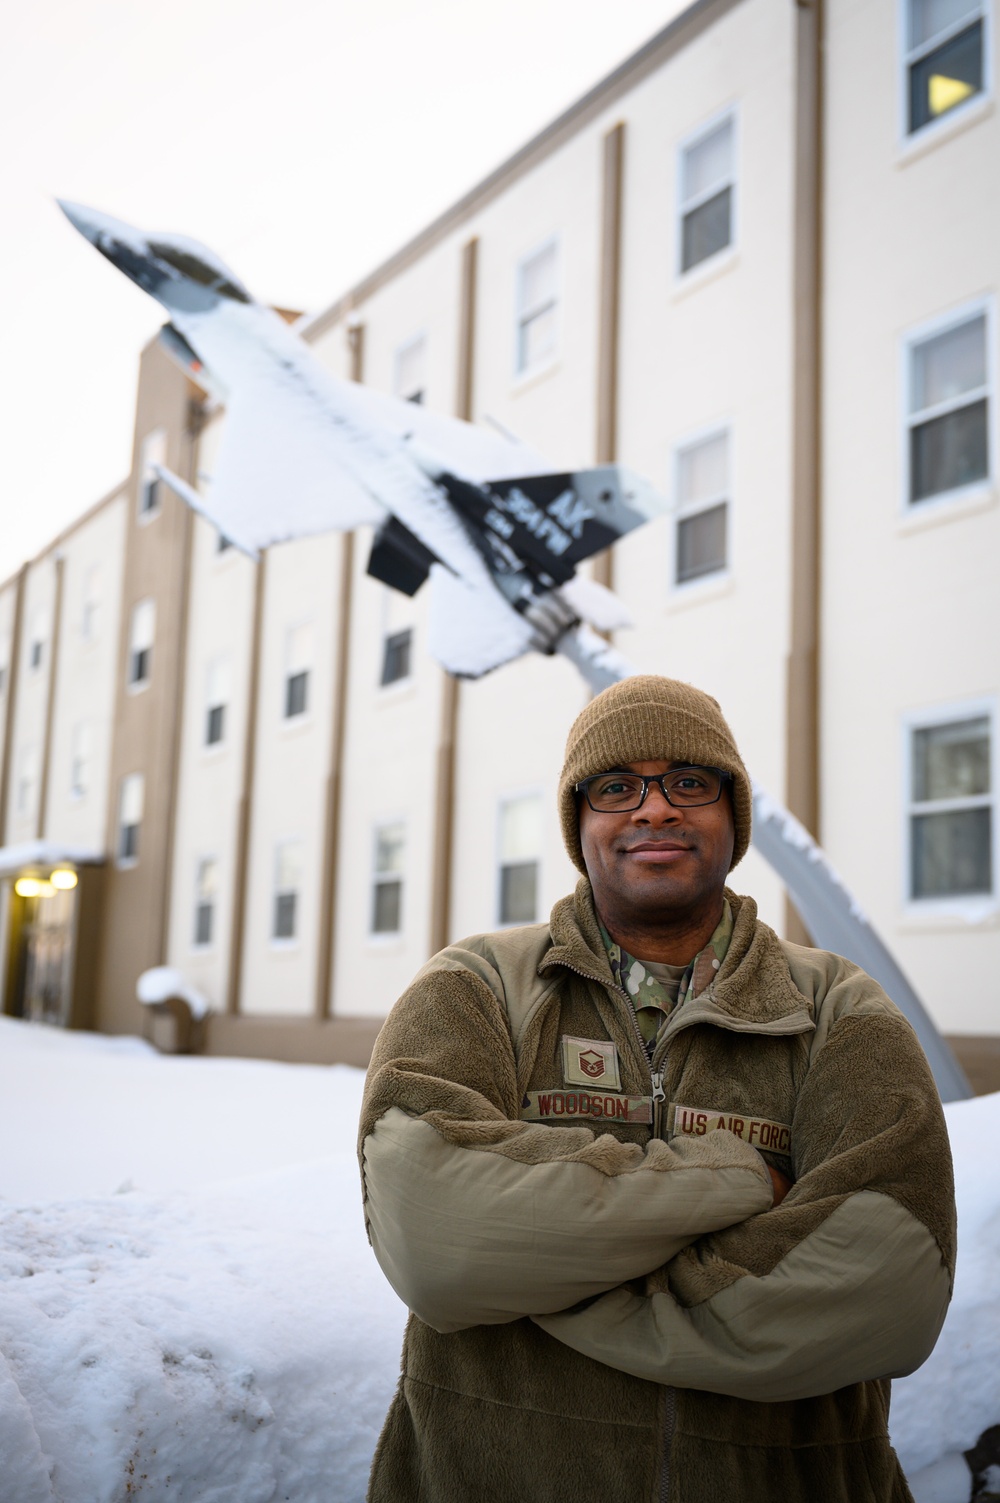 Eielson AFB’s Diversity, Equity, Inclusion, Accessibility program